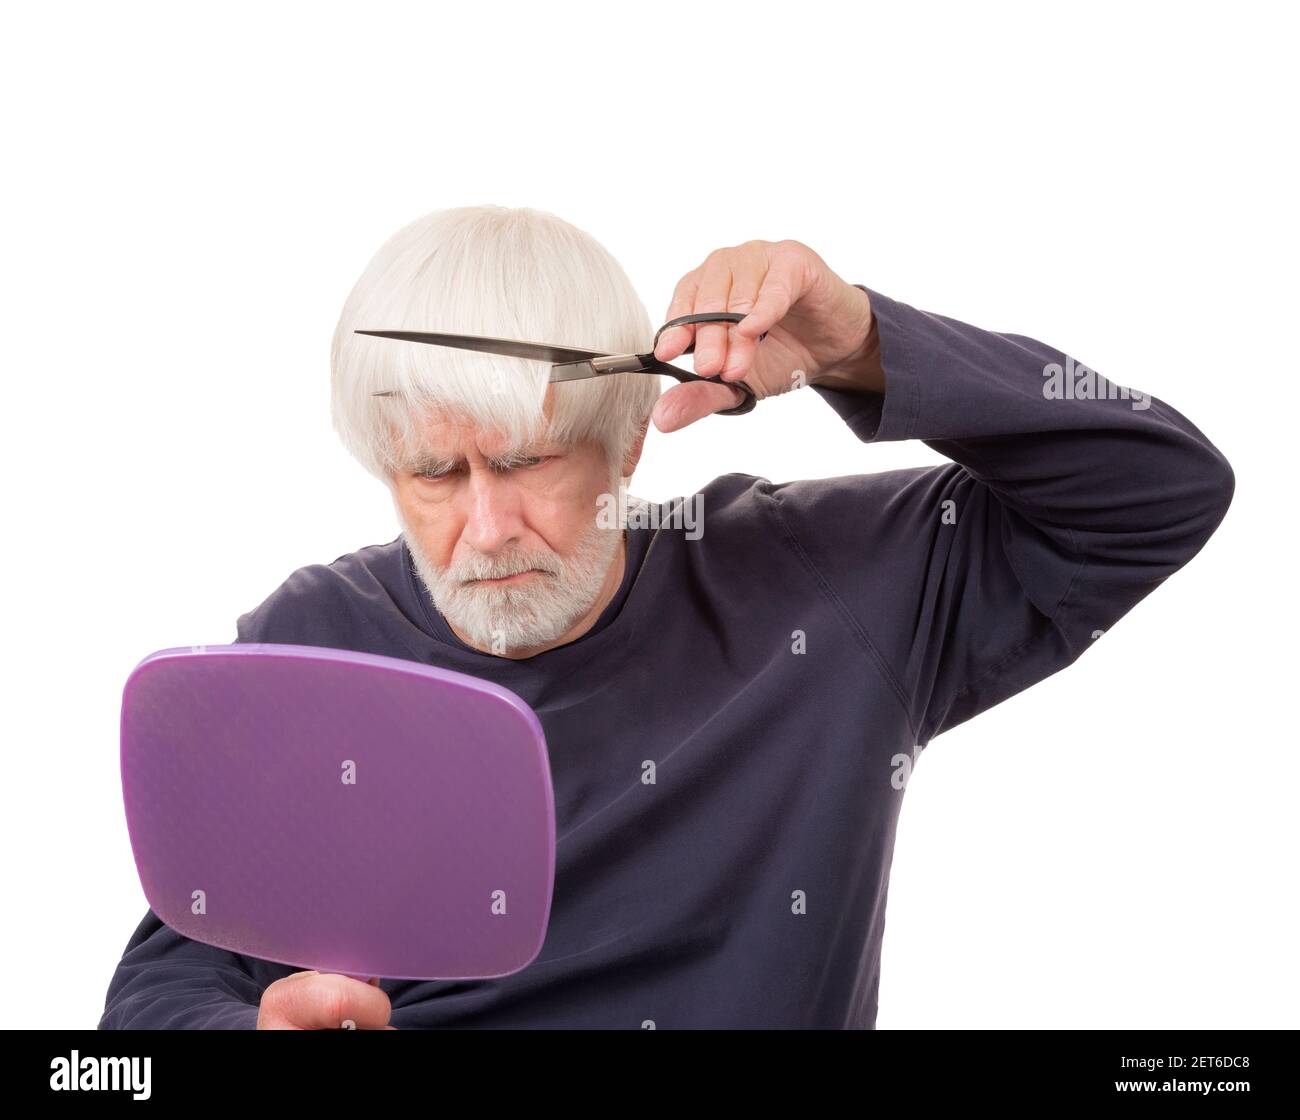 Horizontal shot of an old man giving himself a haircut during the pandemic.  White background. Stock Photo